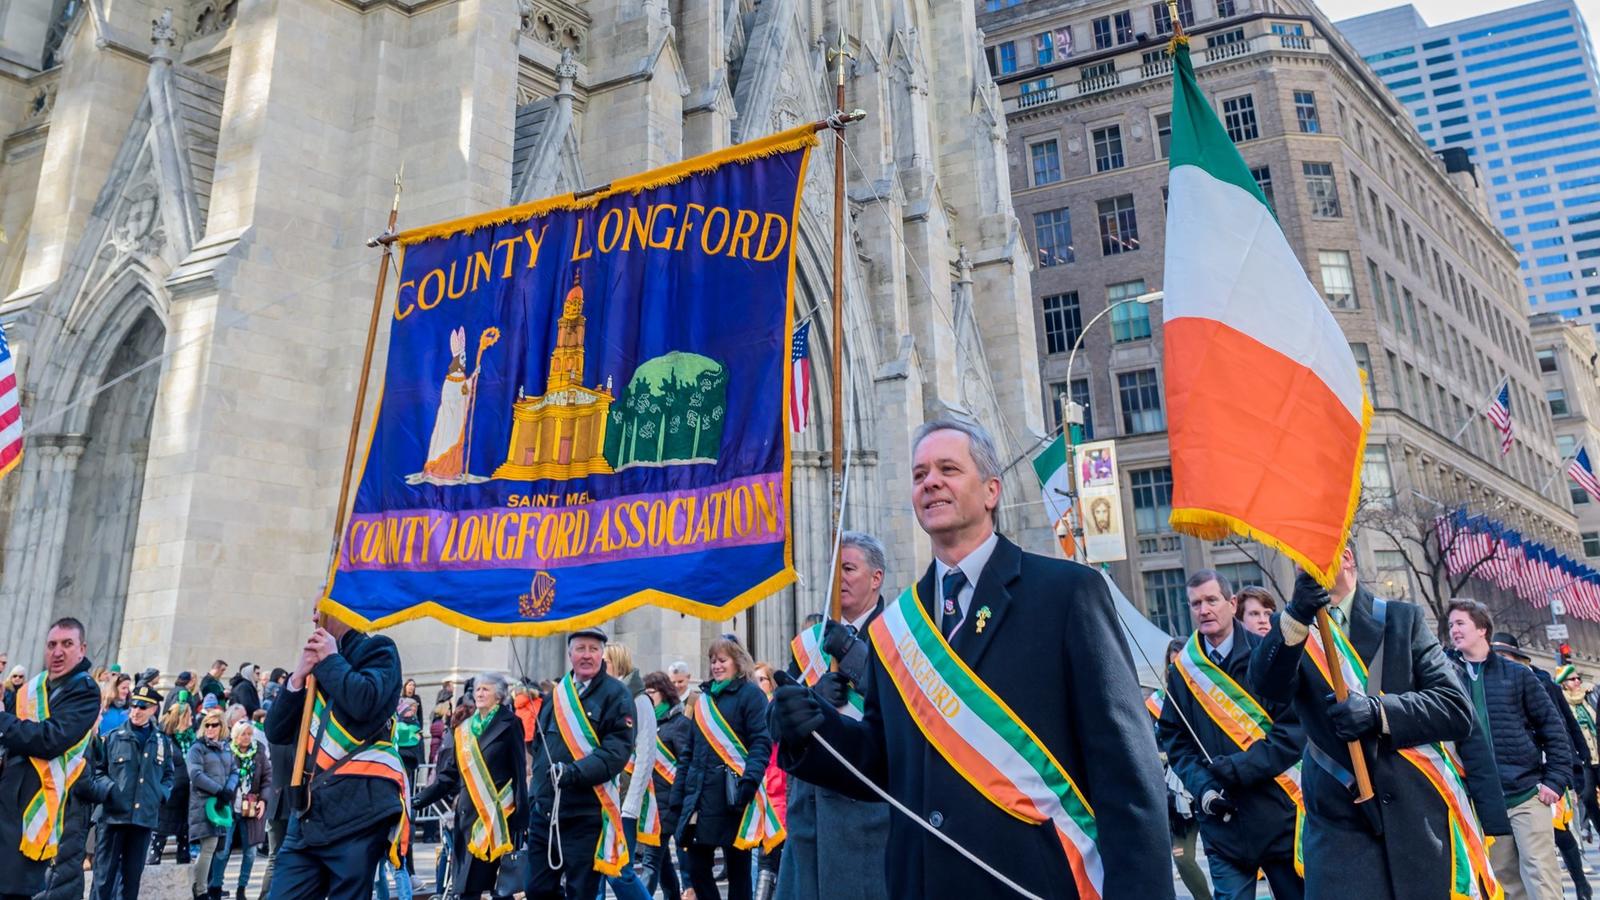 The NYC Saint Patrick's Day Parade was held on March 17, 2018. Along the parade route on 5th Avenue, thousands of spectators came to celebrate. Since it began, this tradition of marching past St. Patrick?s Cathedral has remained unchanged with the ex